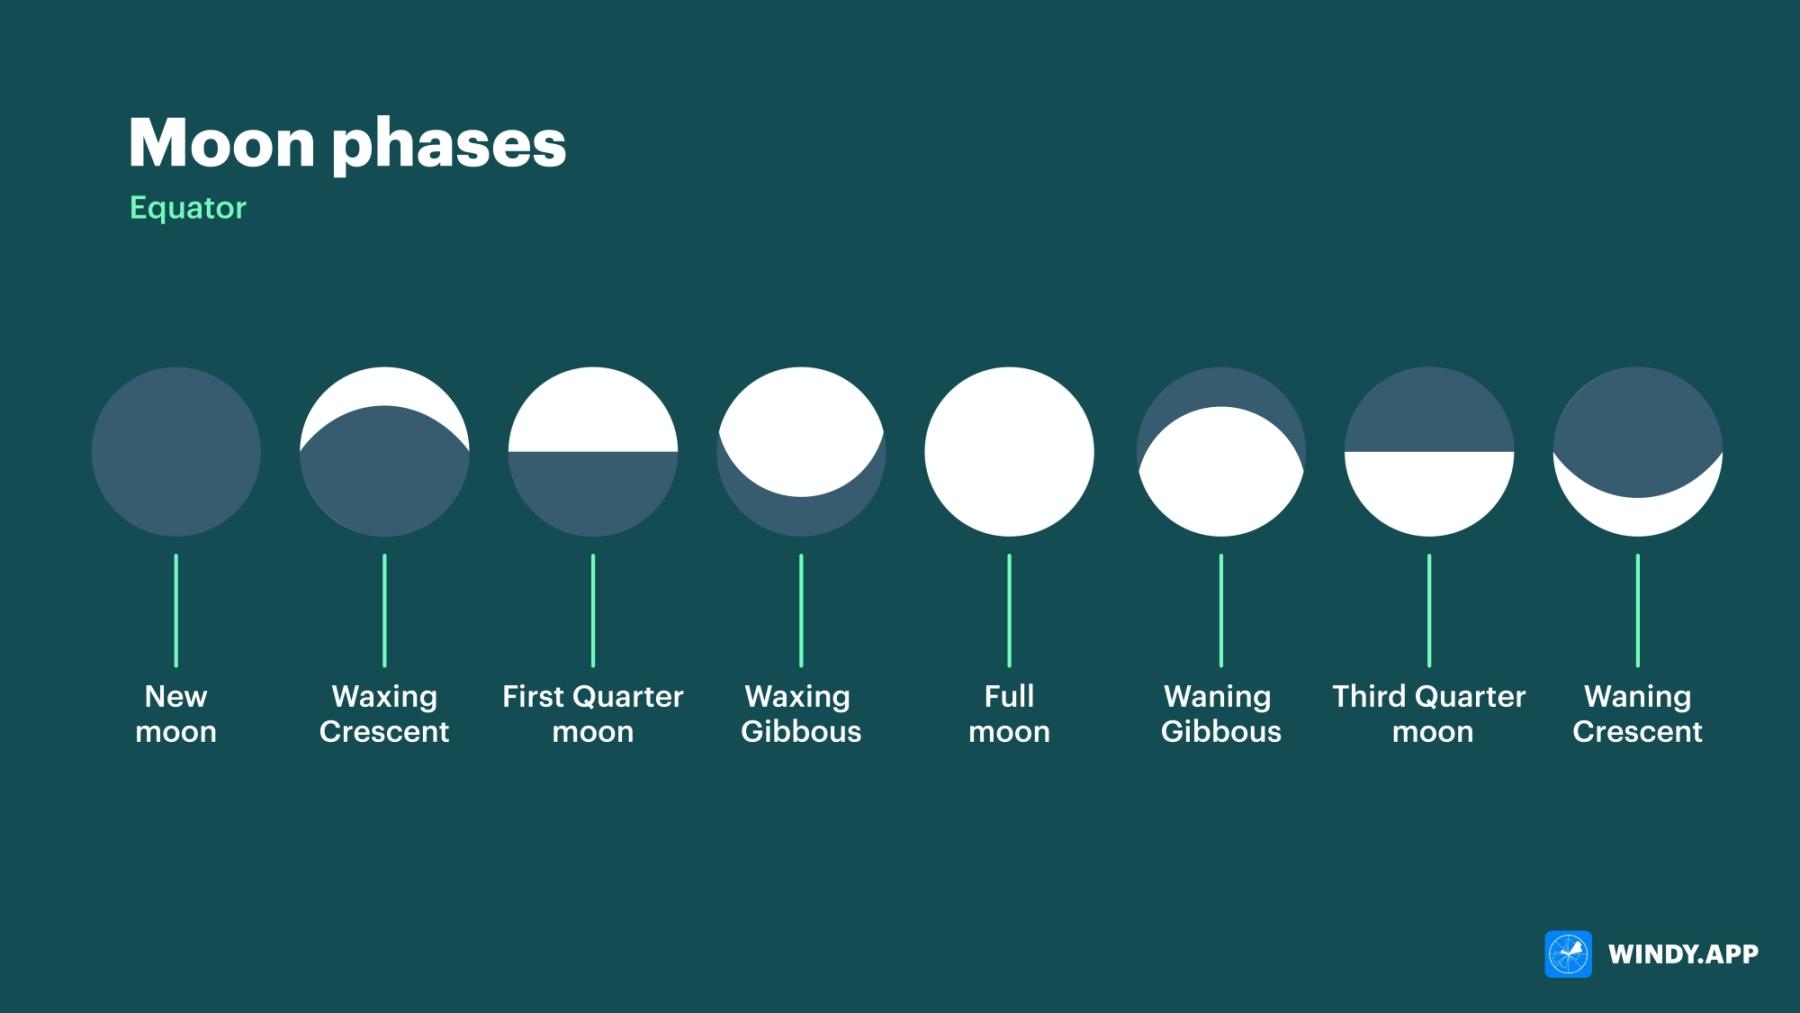 What are the phases of the moon and how to understand them - Windy.app